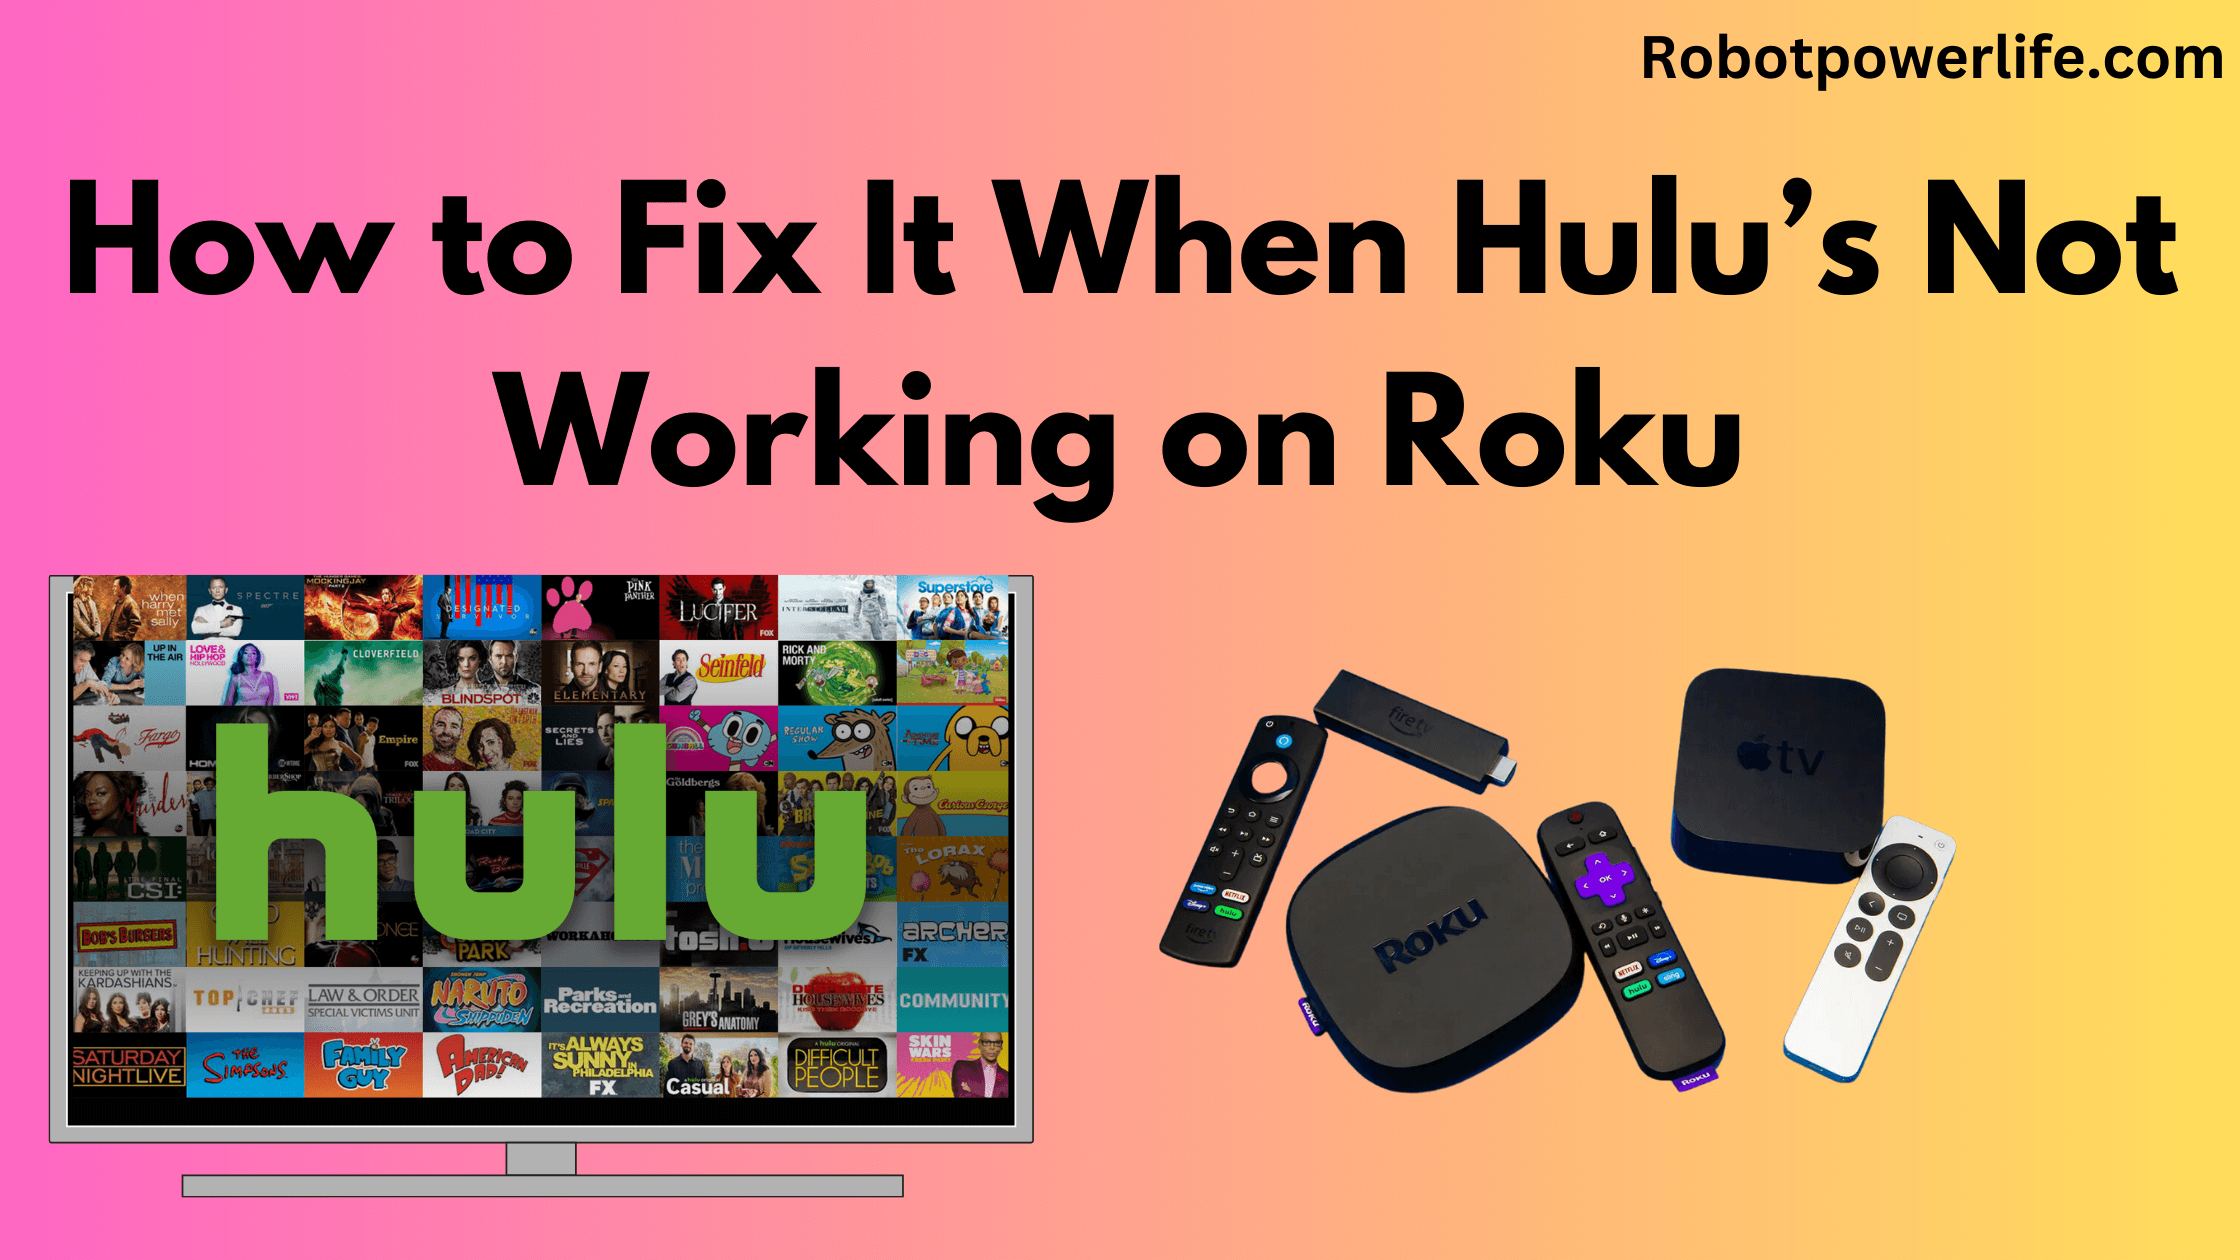 How to Fix It When Hulu’s Not Working on Roku